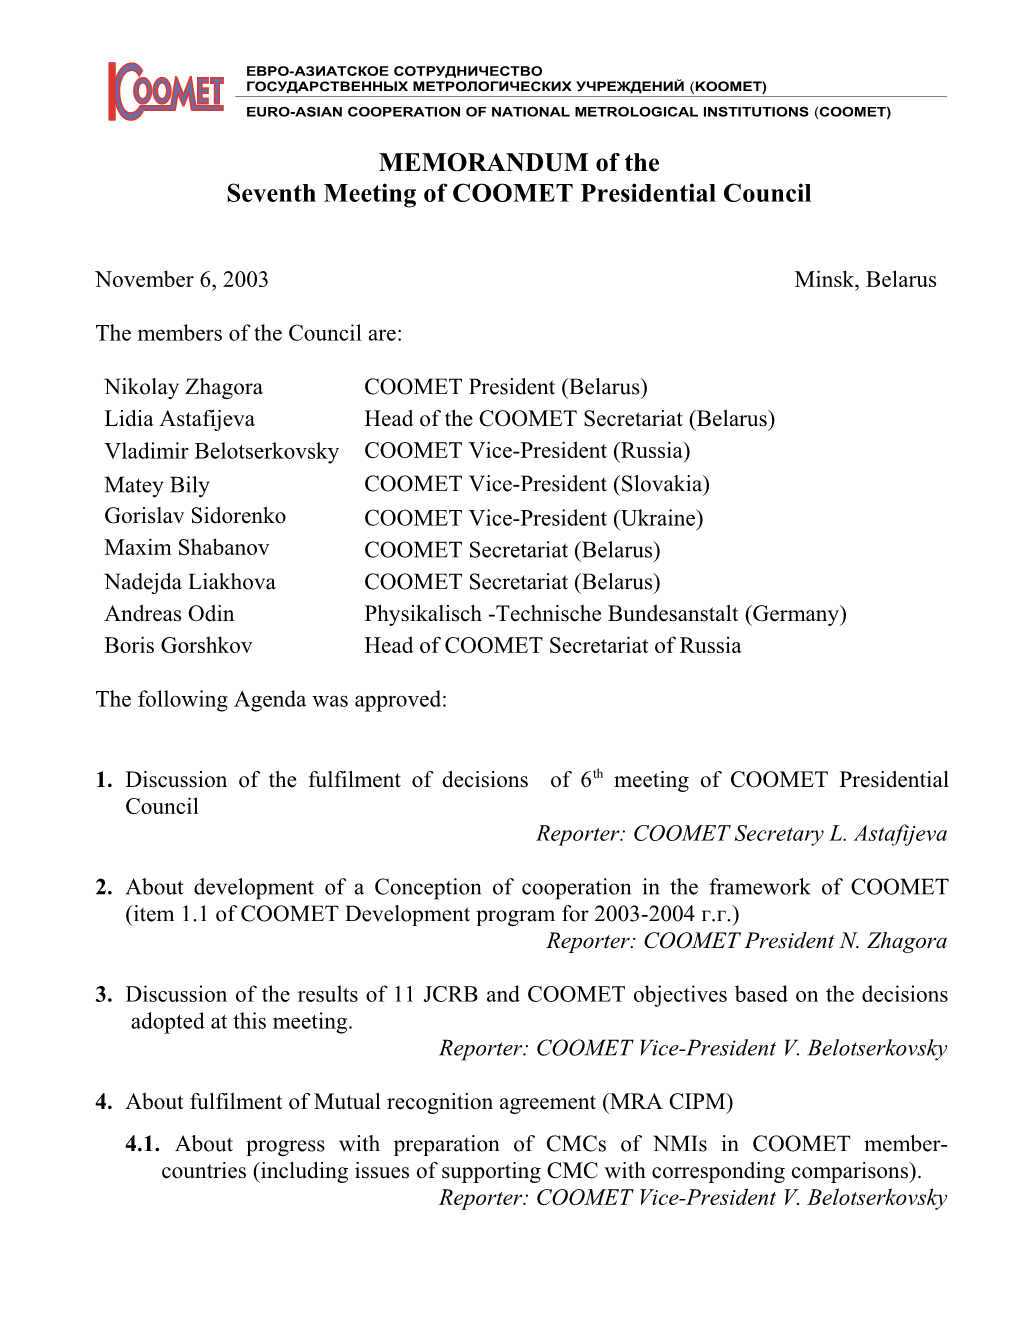 Seventh Meeting of COOMET Presidential Council